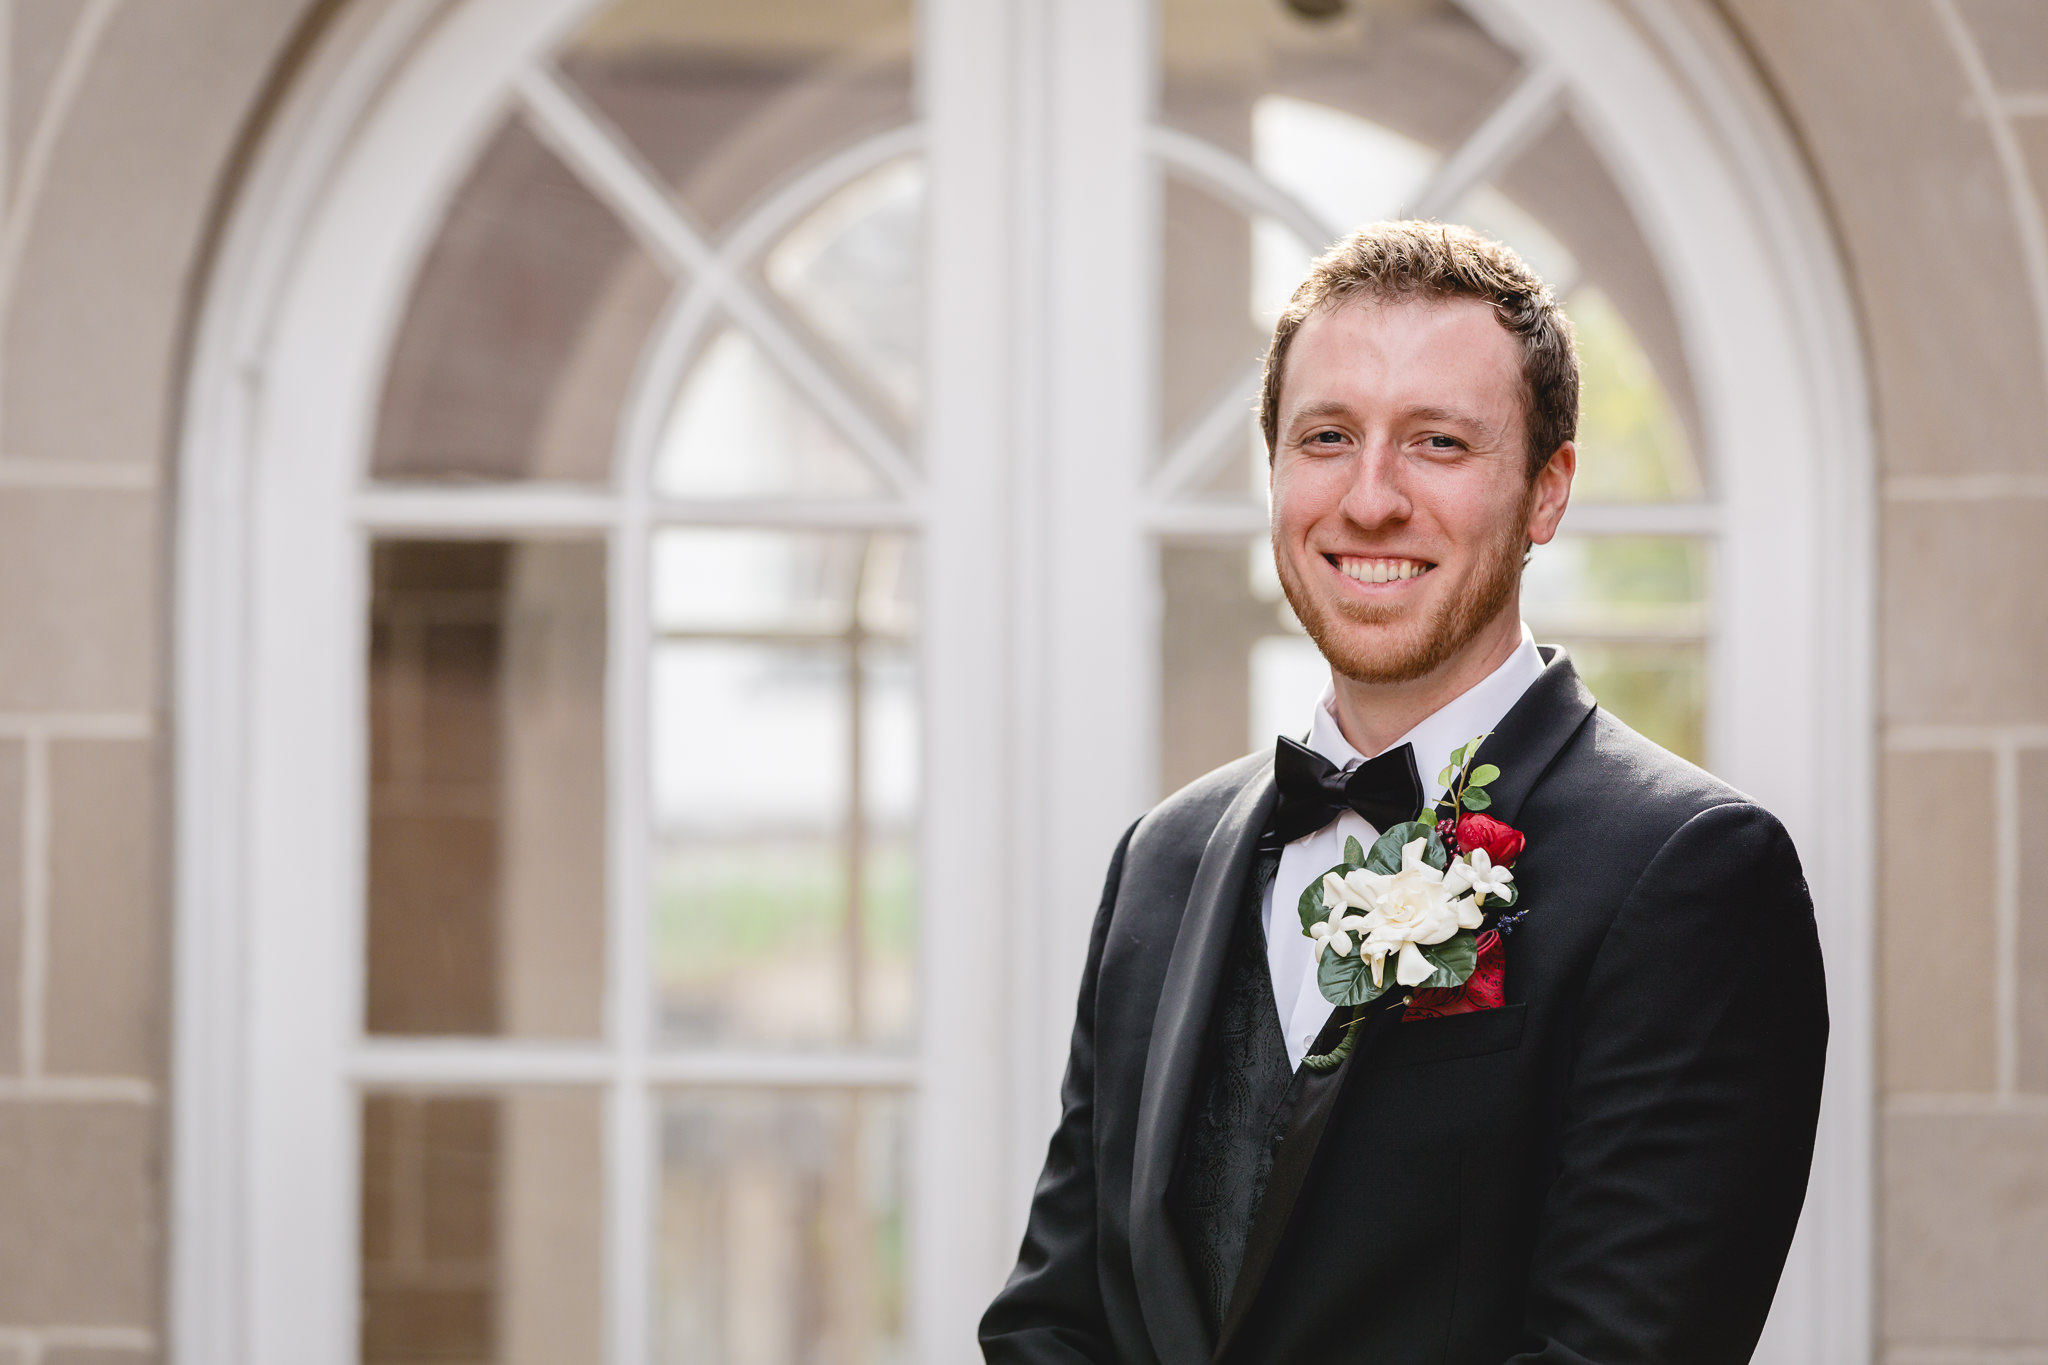 Groom poses for a portrait before his wedding at St. John the Baptist in Monaca